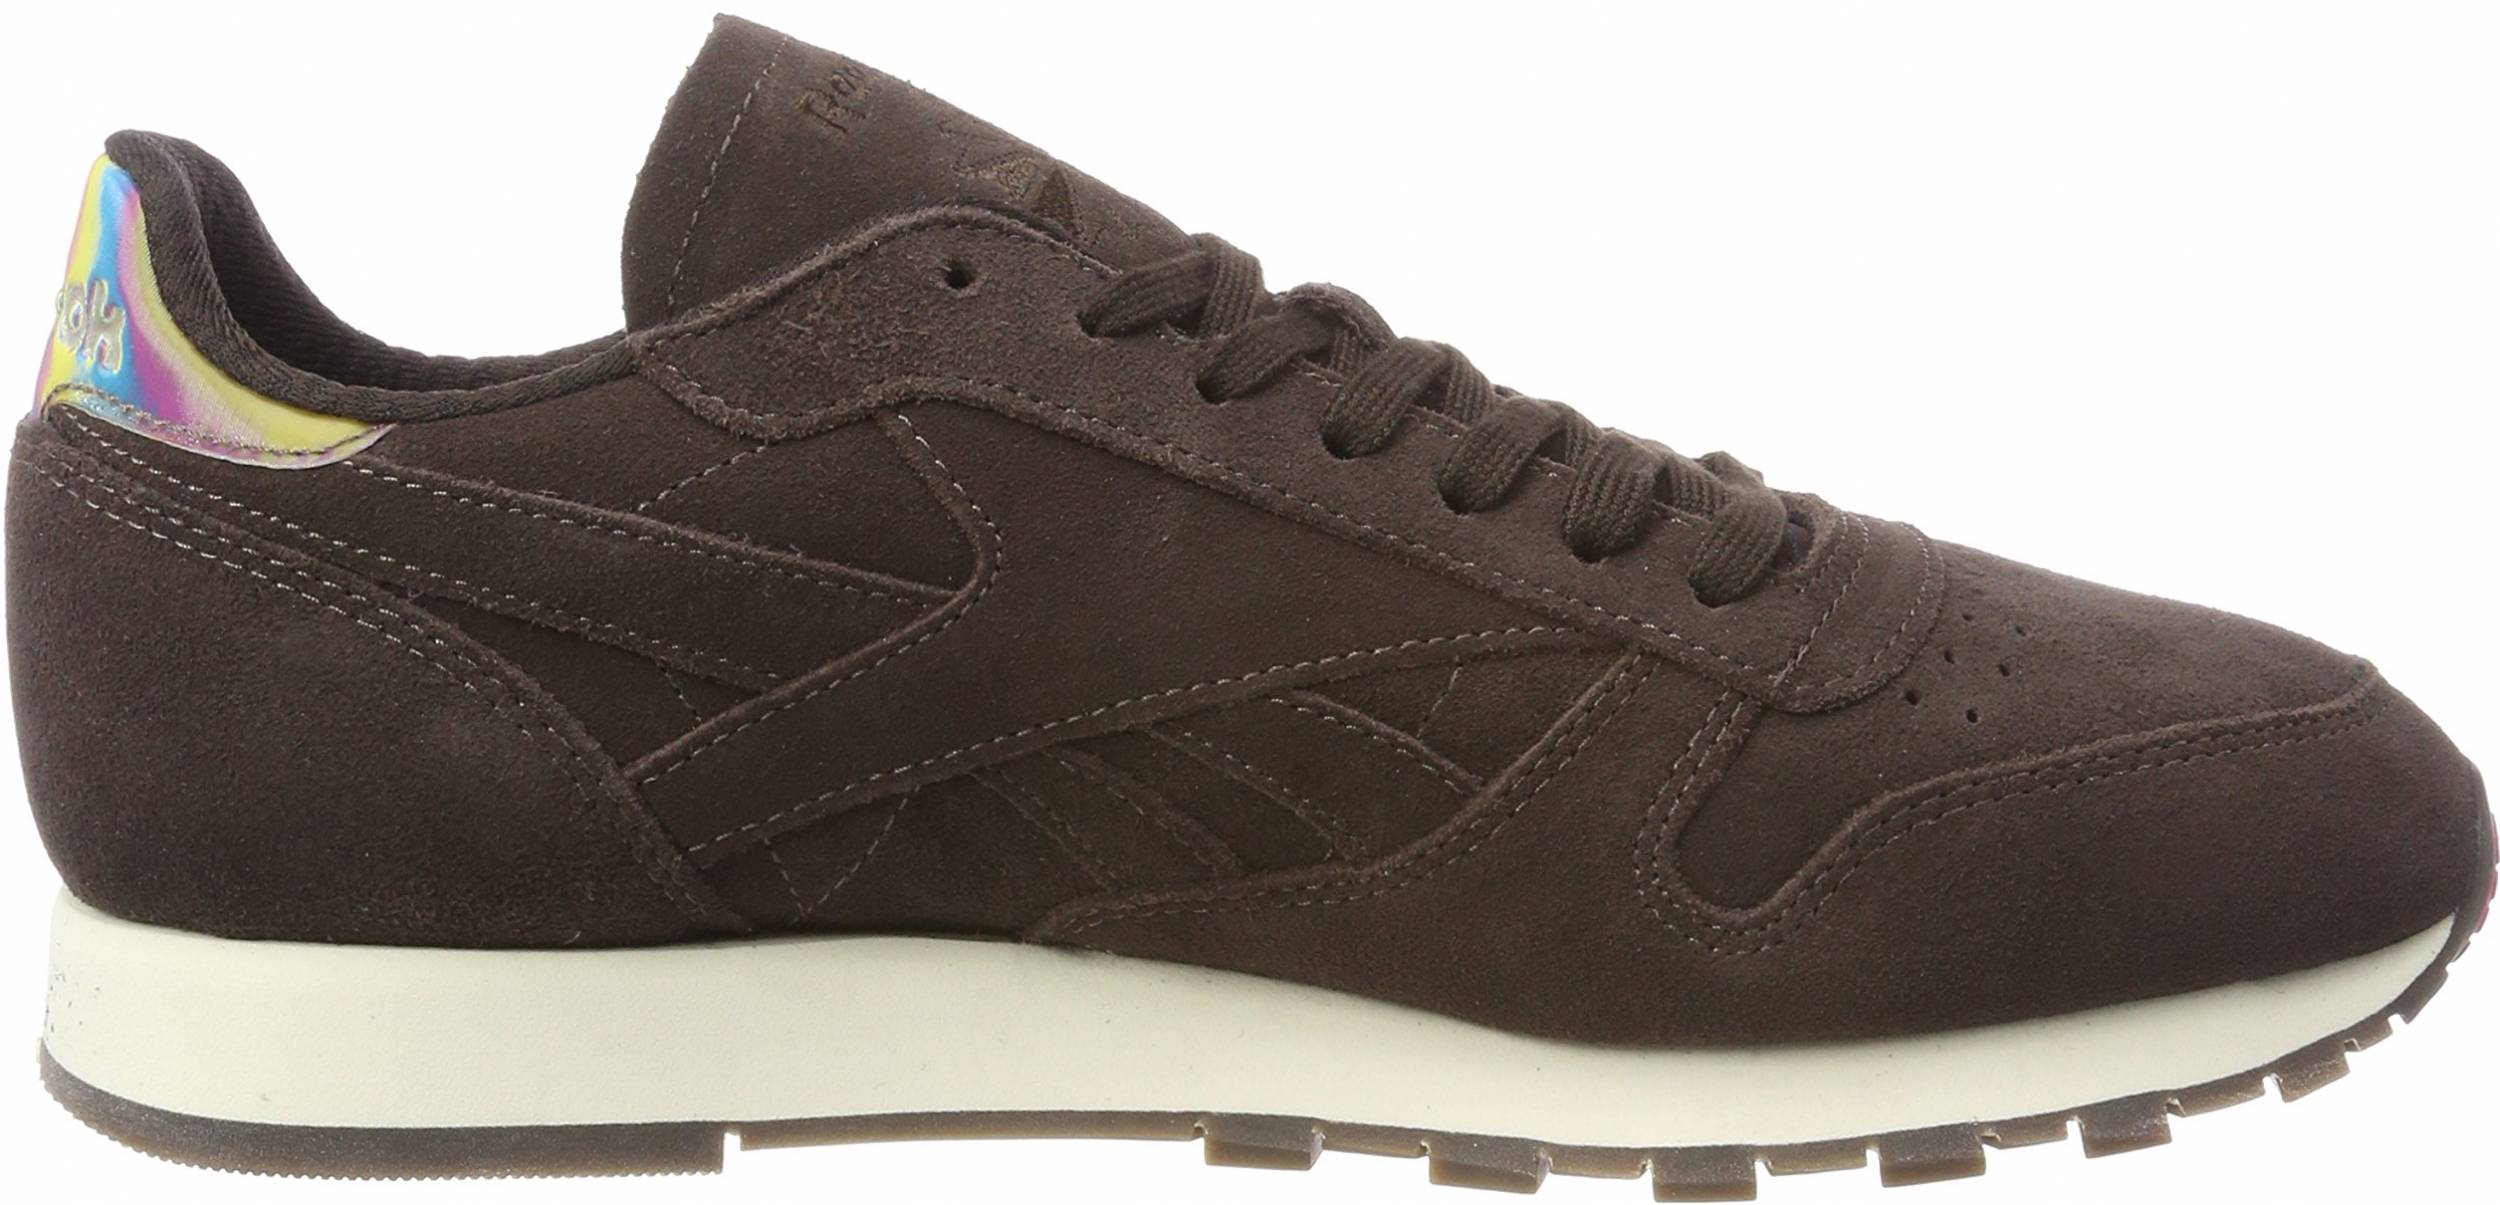 Only $63 + Review of Reebok Classic Leather MSP | RunRepeat